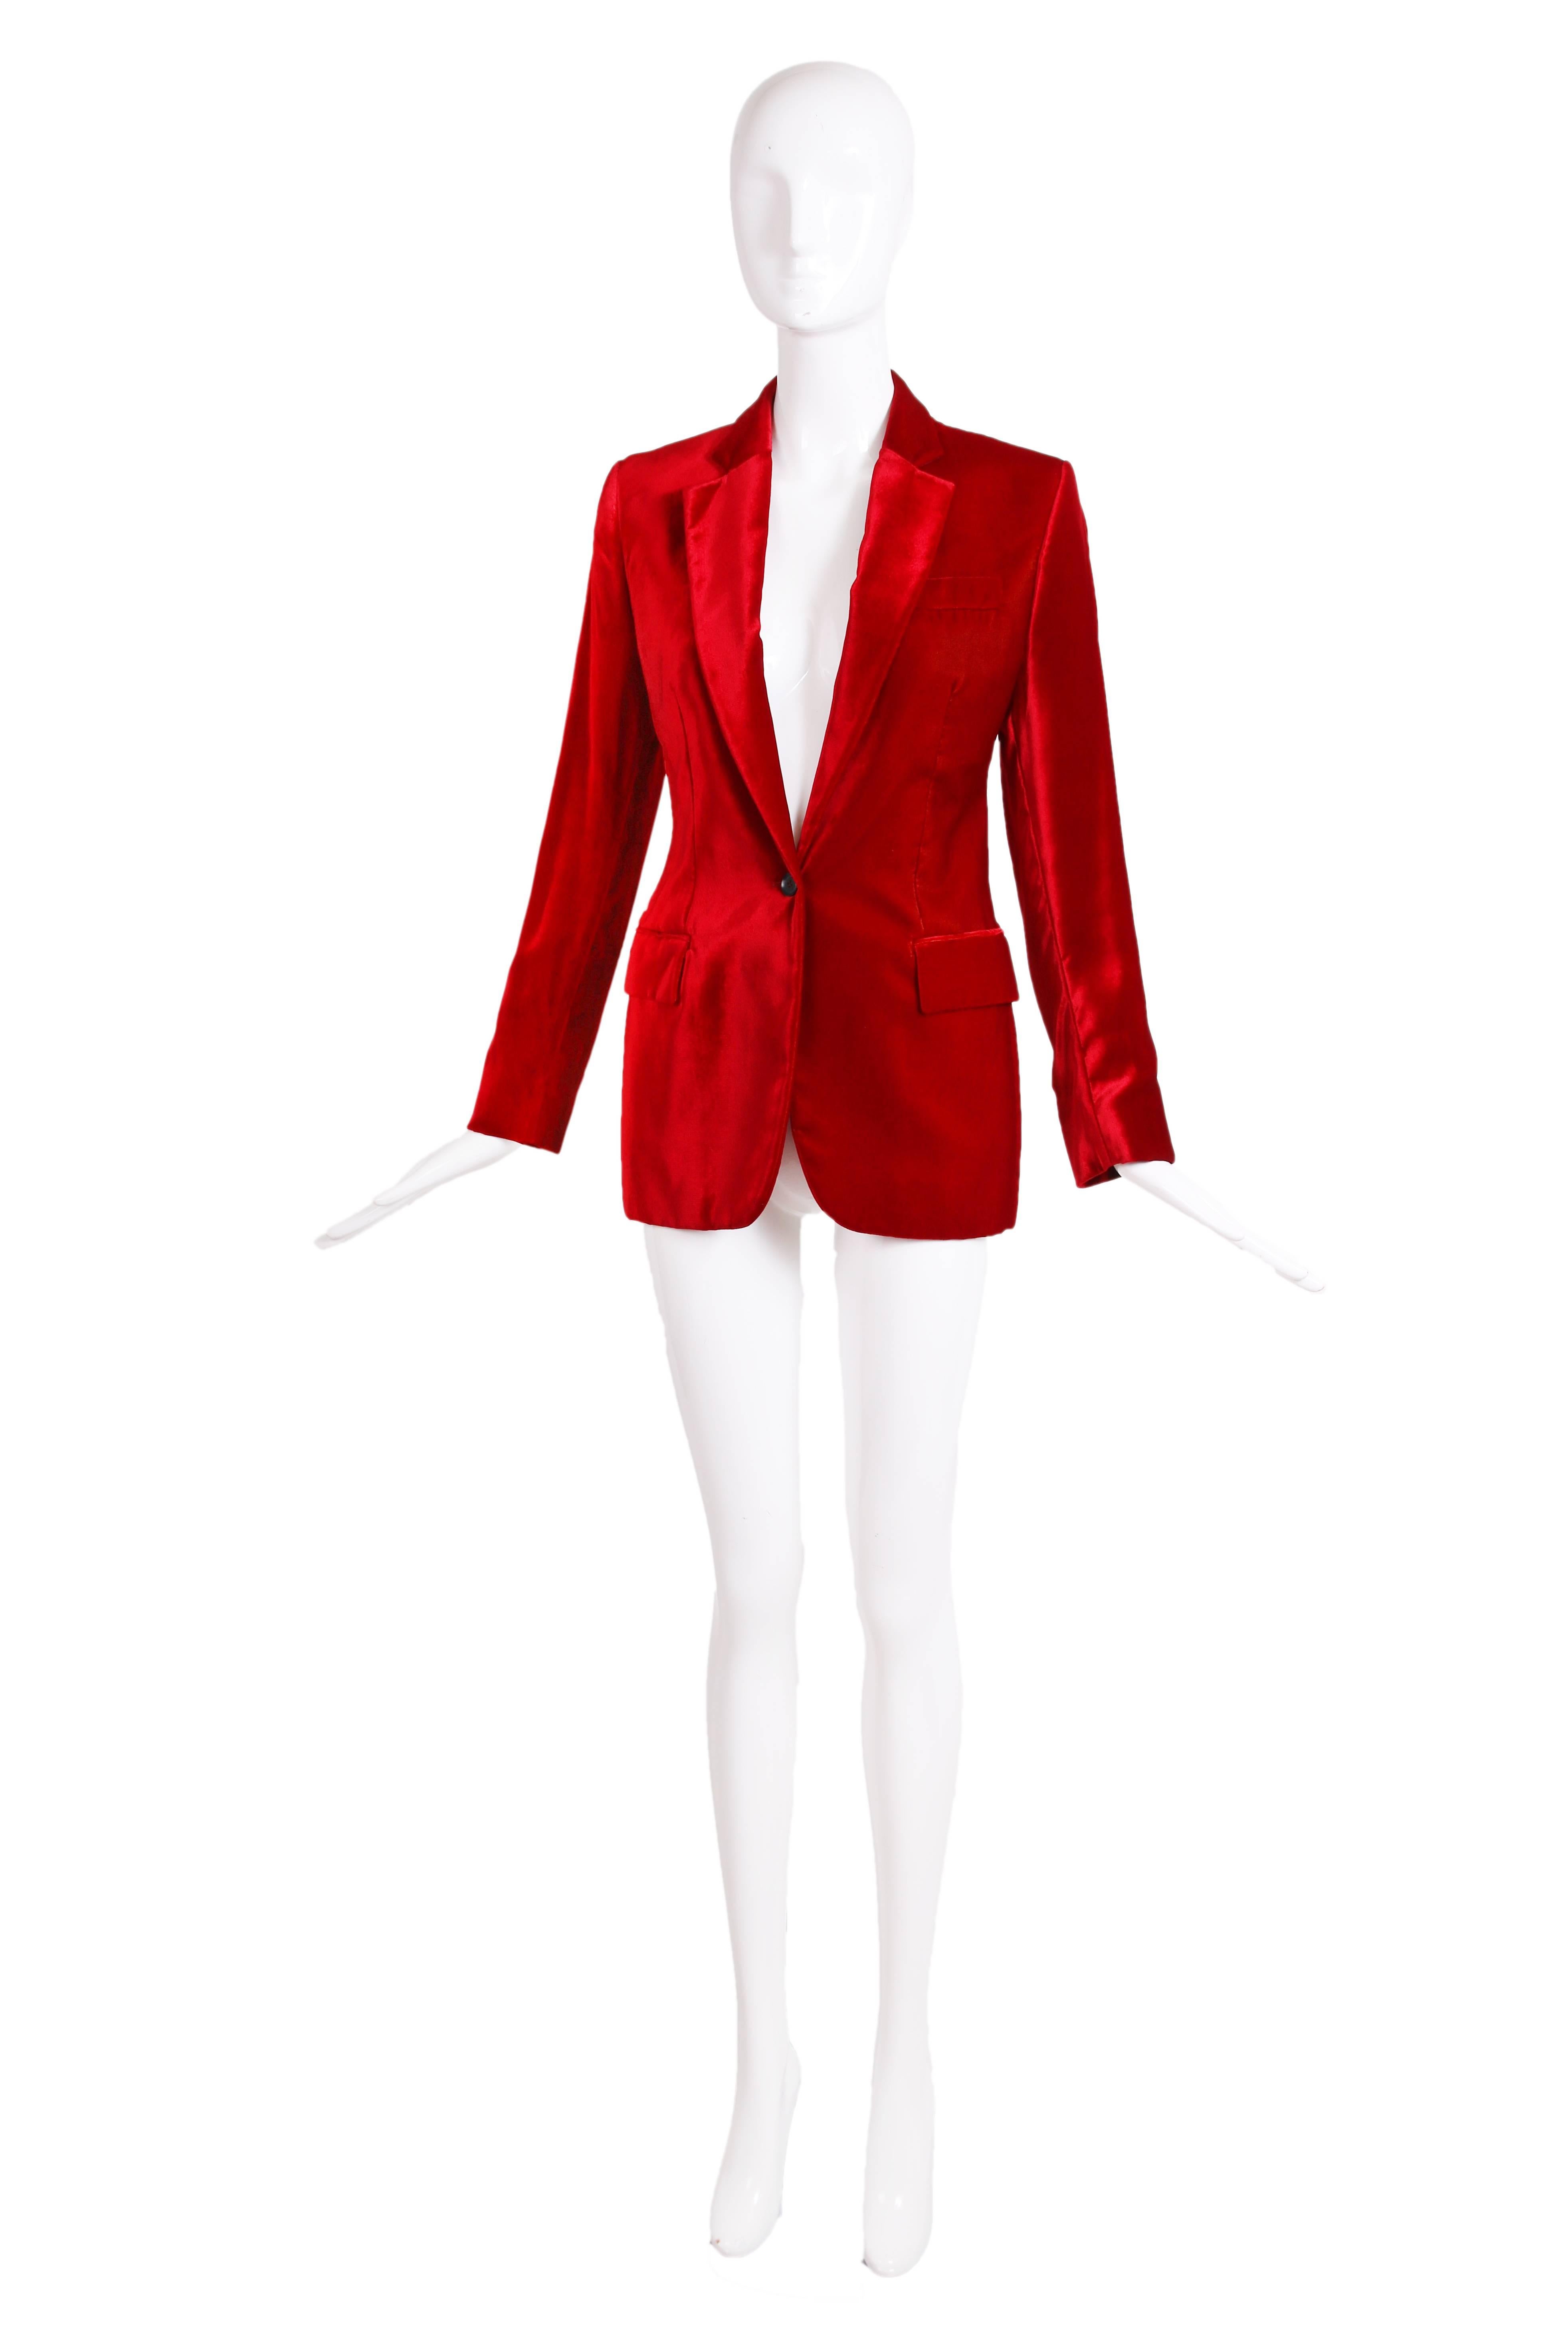 1999 Gucci by Tom Ford deep red velvet jacket with slim fit and single button closure at waist. Jacket has two frontal pockets at waist, breast pocket, interior pocket, vent at back and buttons at the wrist cuffs. Fully lined. In excellent condition